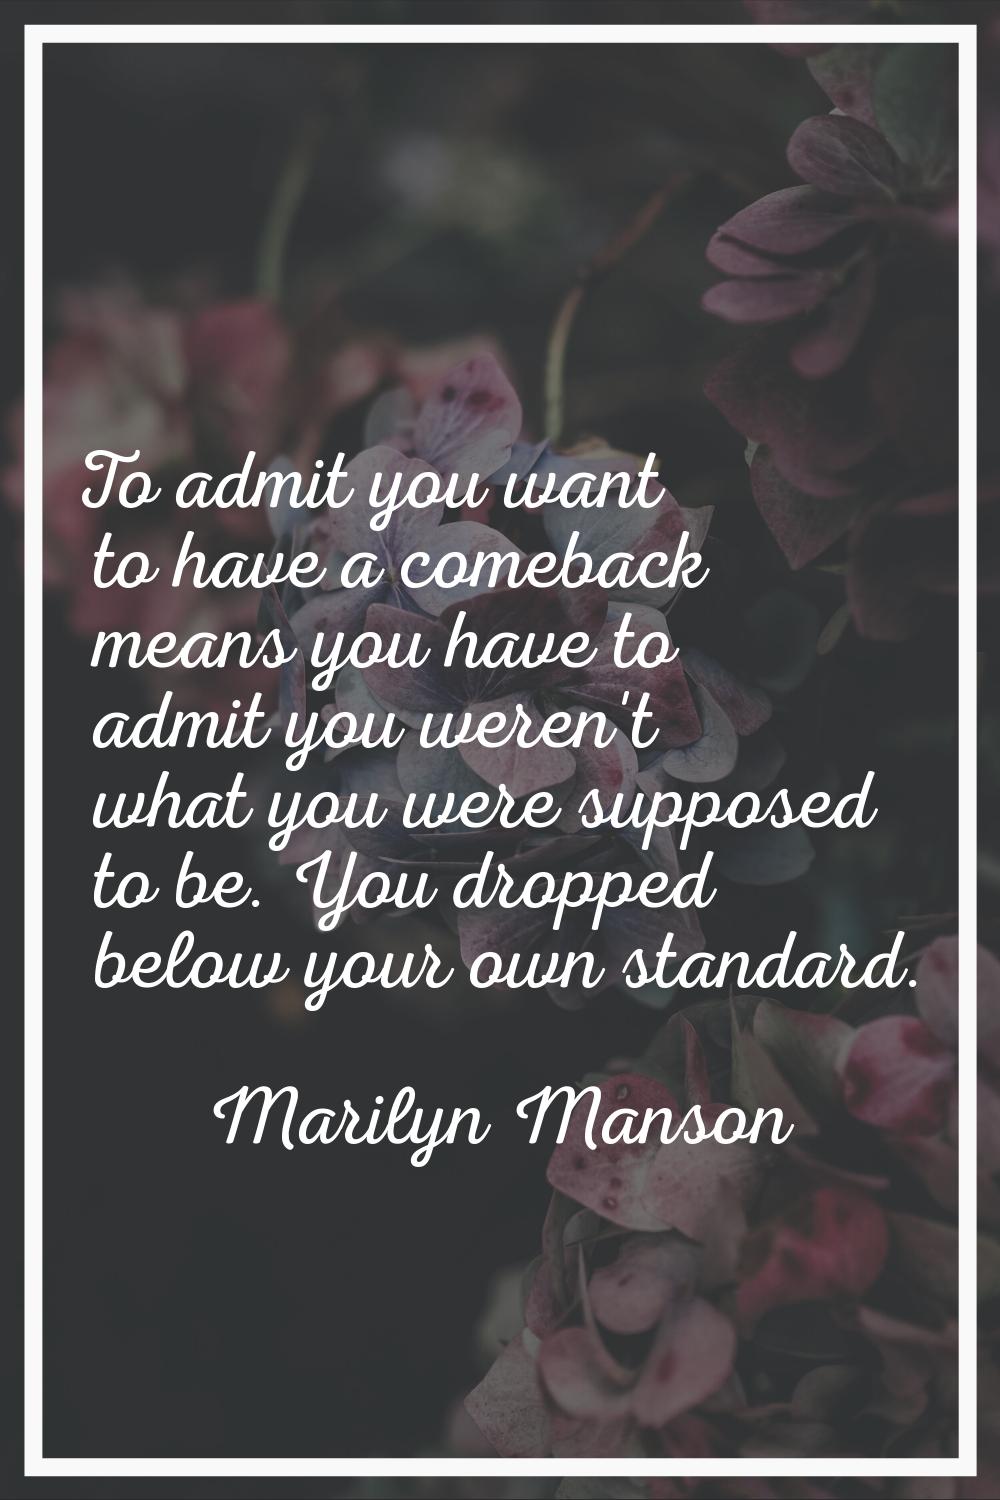 To admit you want to have a comeback means you have to admit you weren't what you were supposed to 